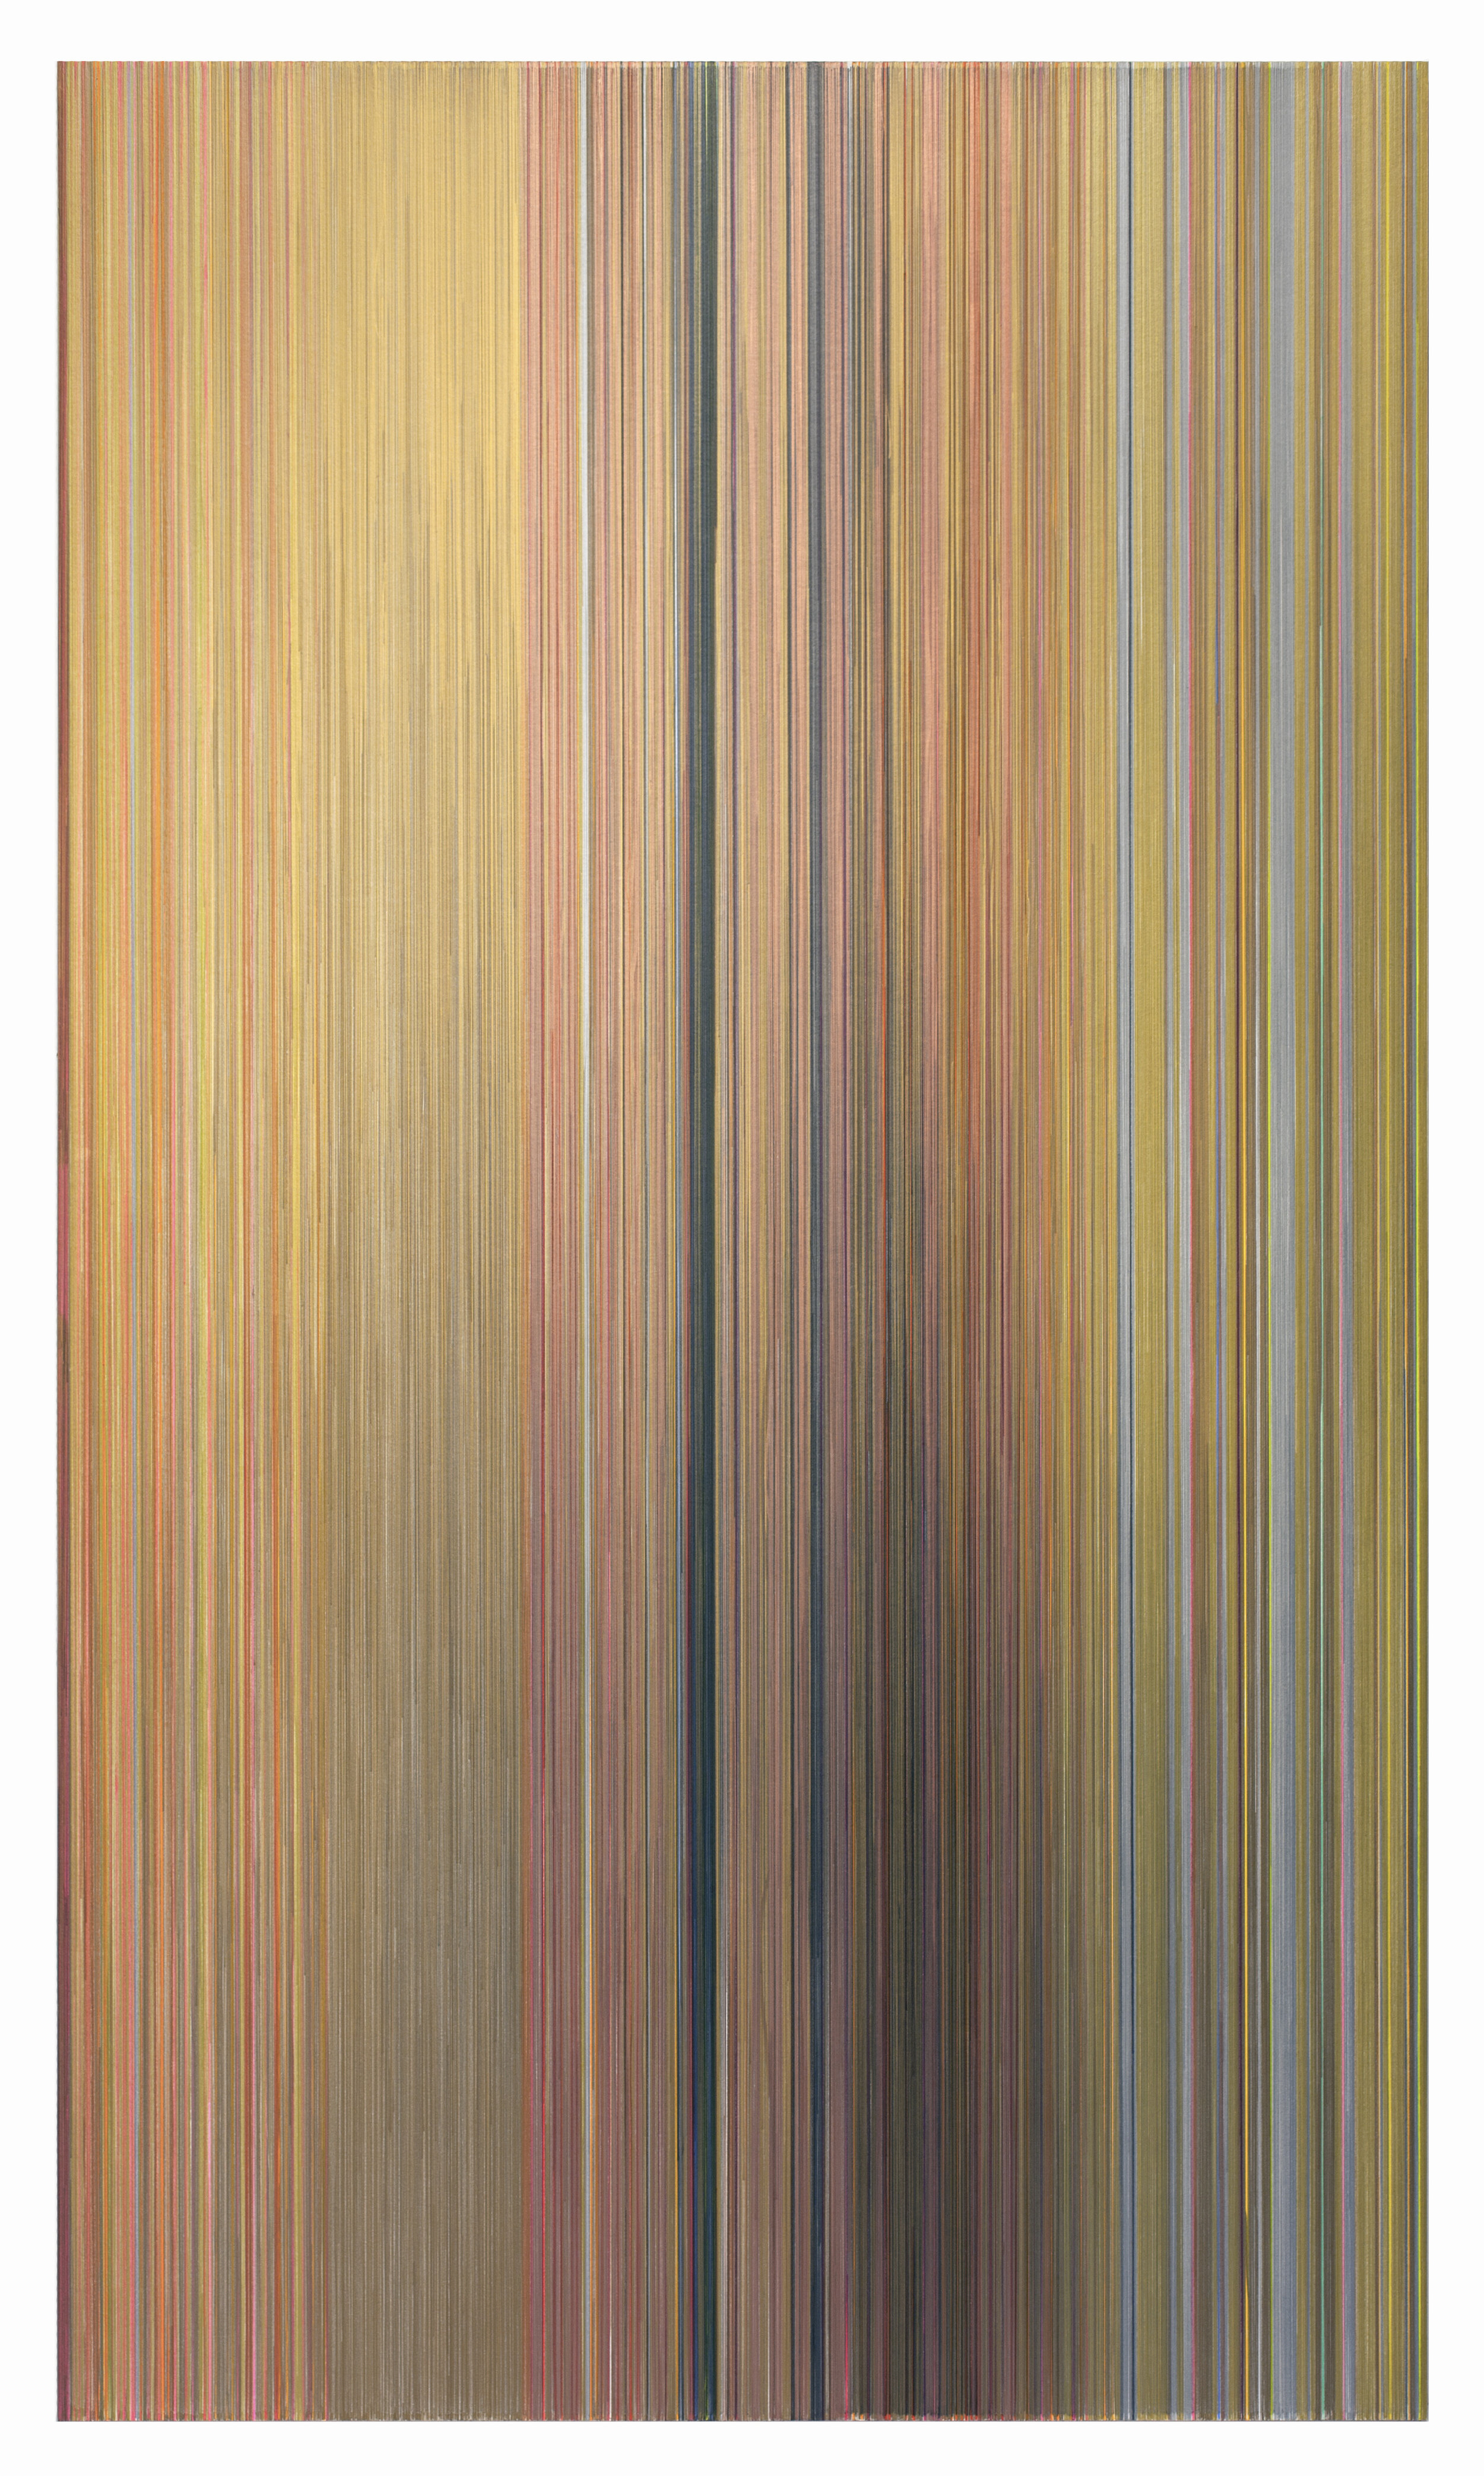    as though air could turn to honey   2017 graphite and colored pencil on mat board 59 by 102 inches title from page 290 of Wanderlust: A History of Walking by Rebecca Solnit (2001) Penguin Books   